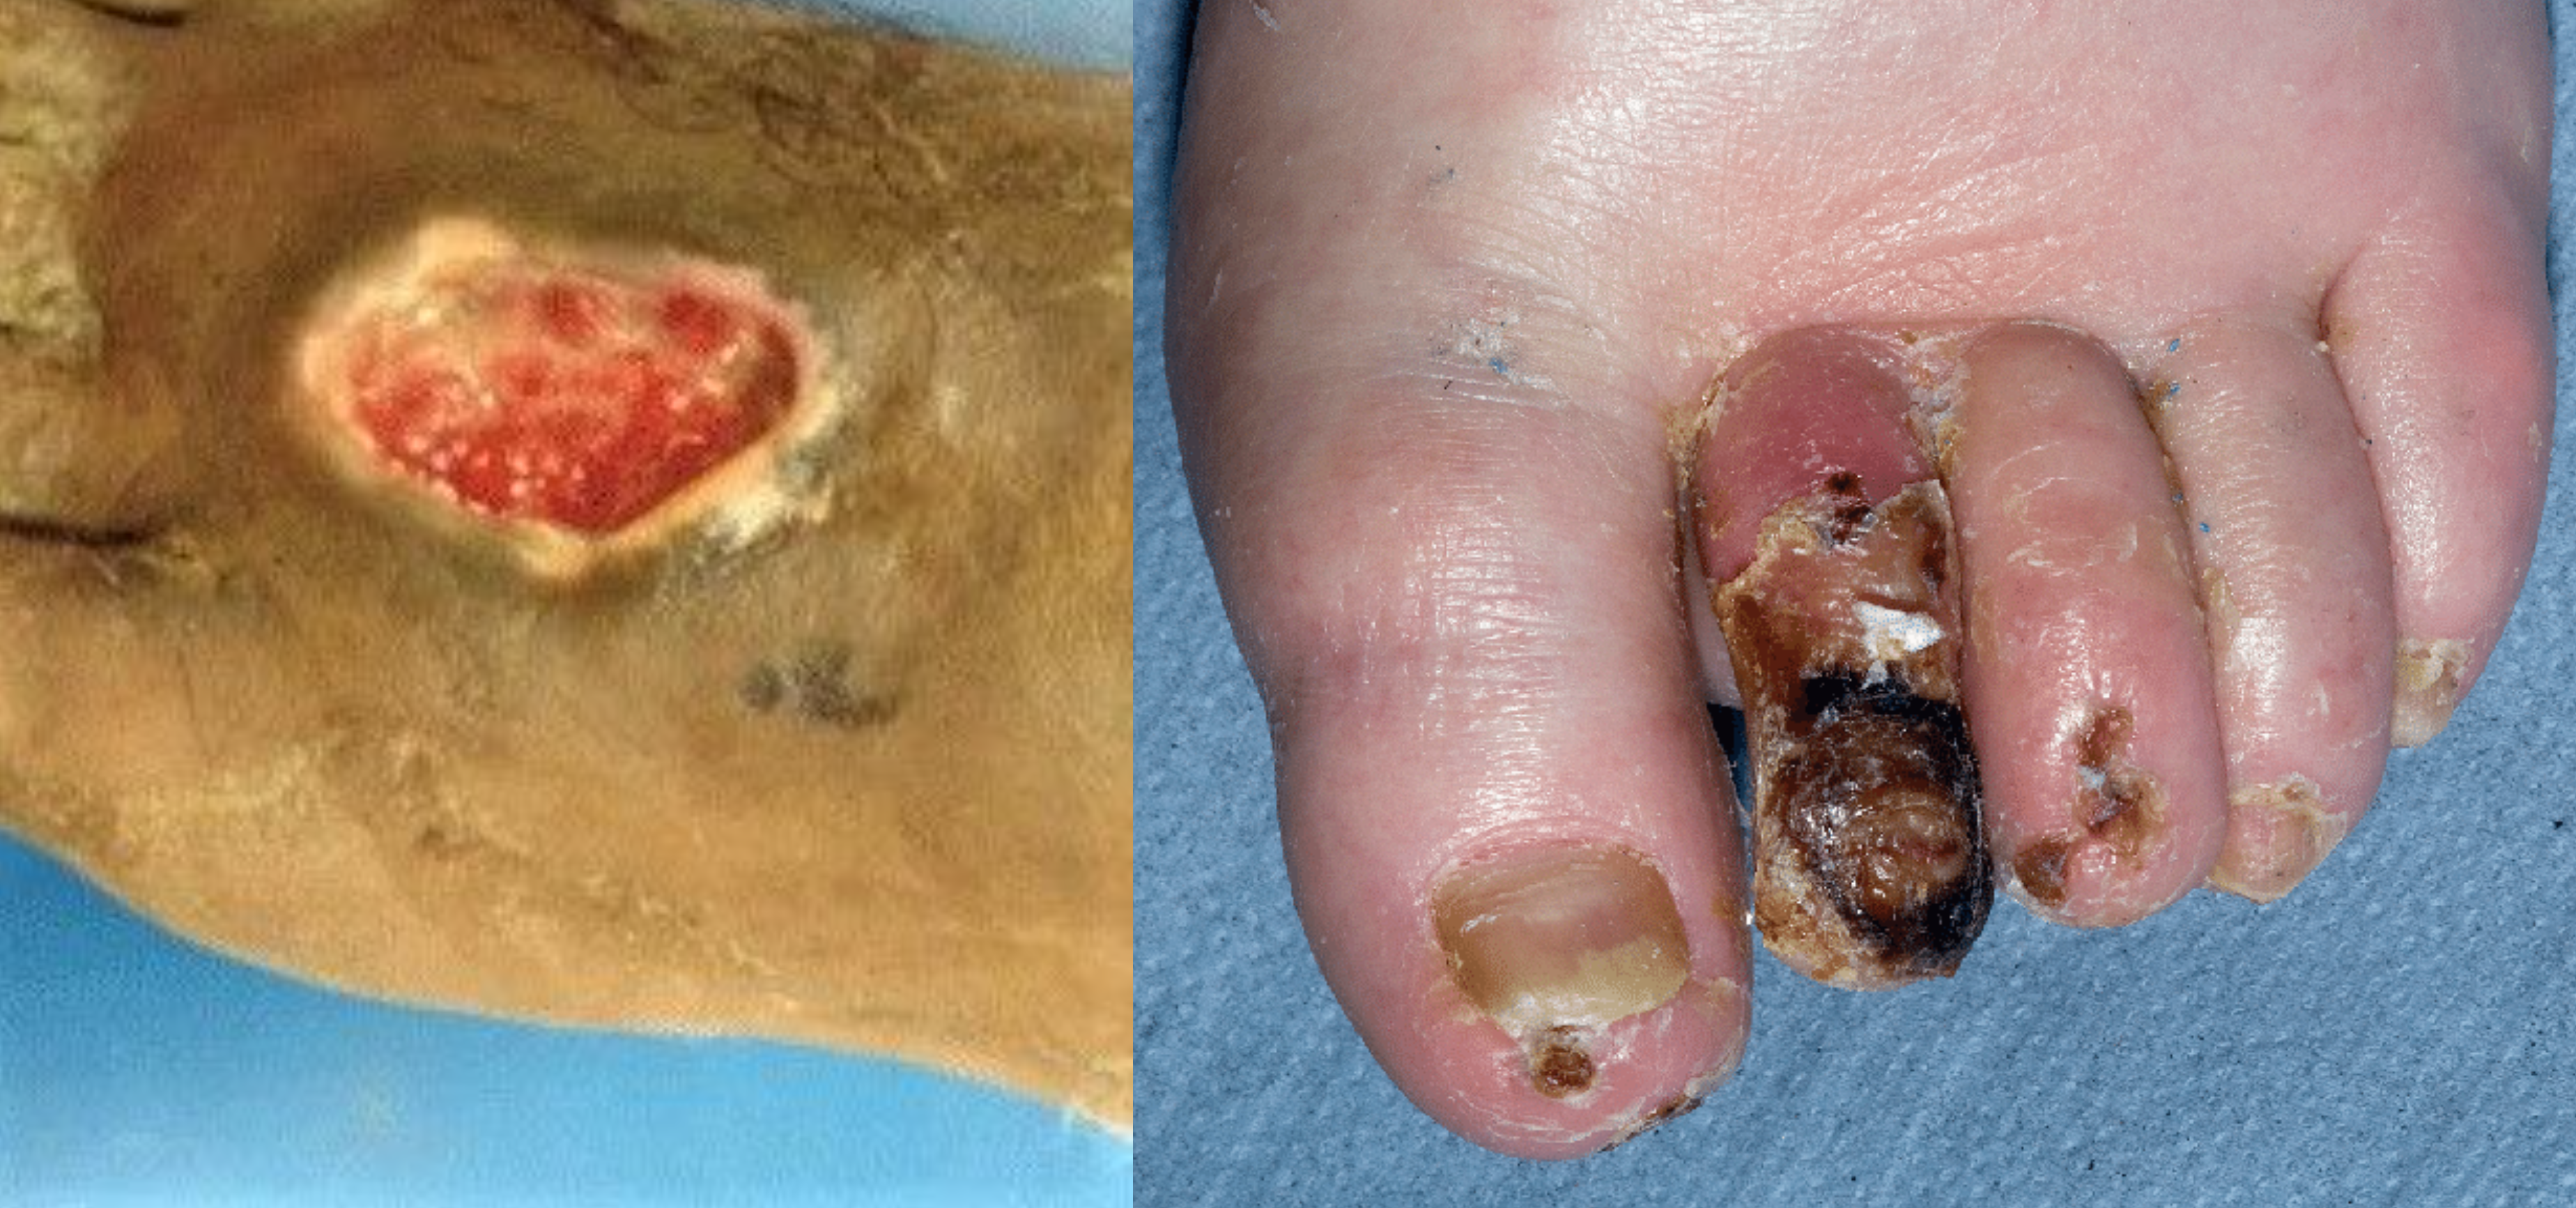 Photos showing Arterial Insufficiency Ulcer and Necrotic Toes